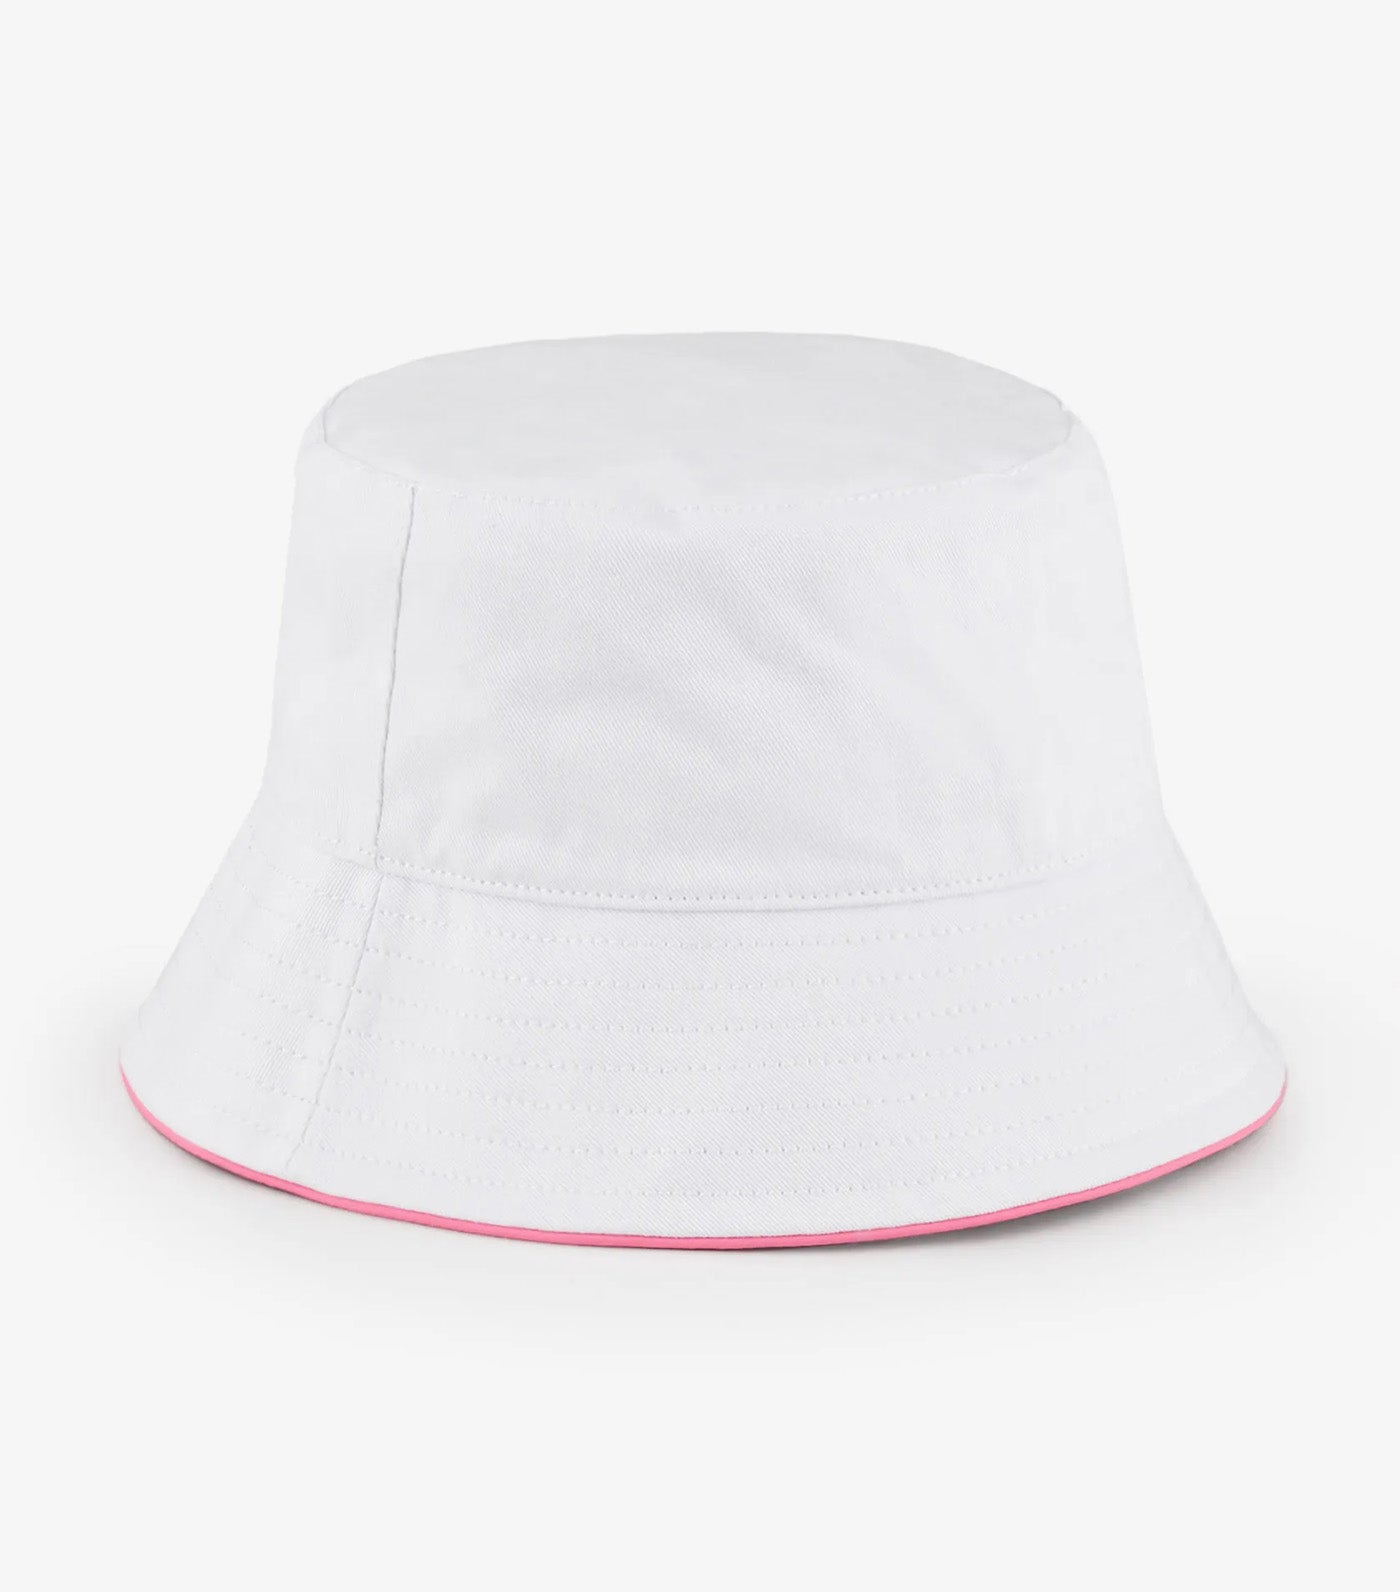 Summer Beats Recycled Cotton Twill Bucket Hat